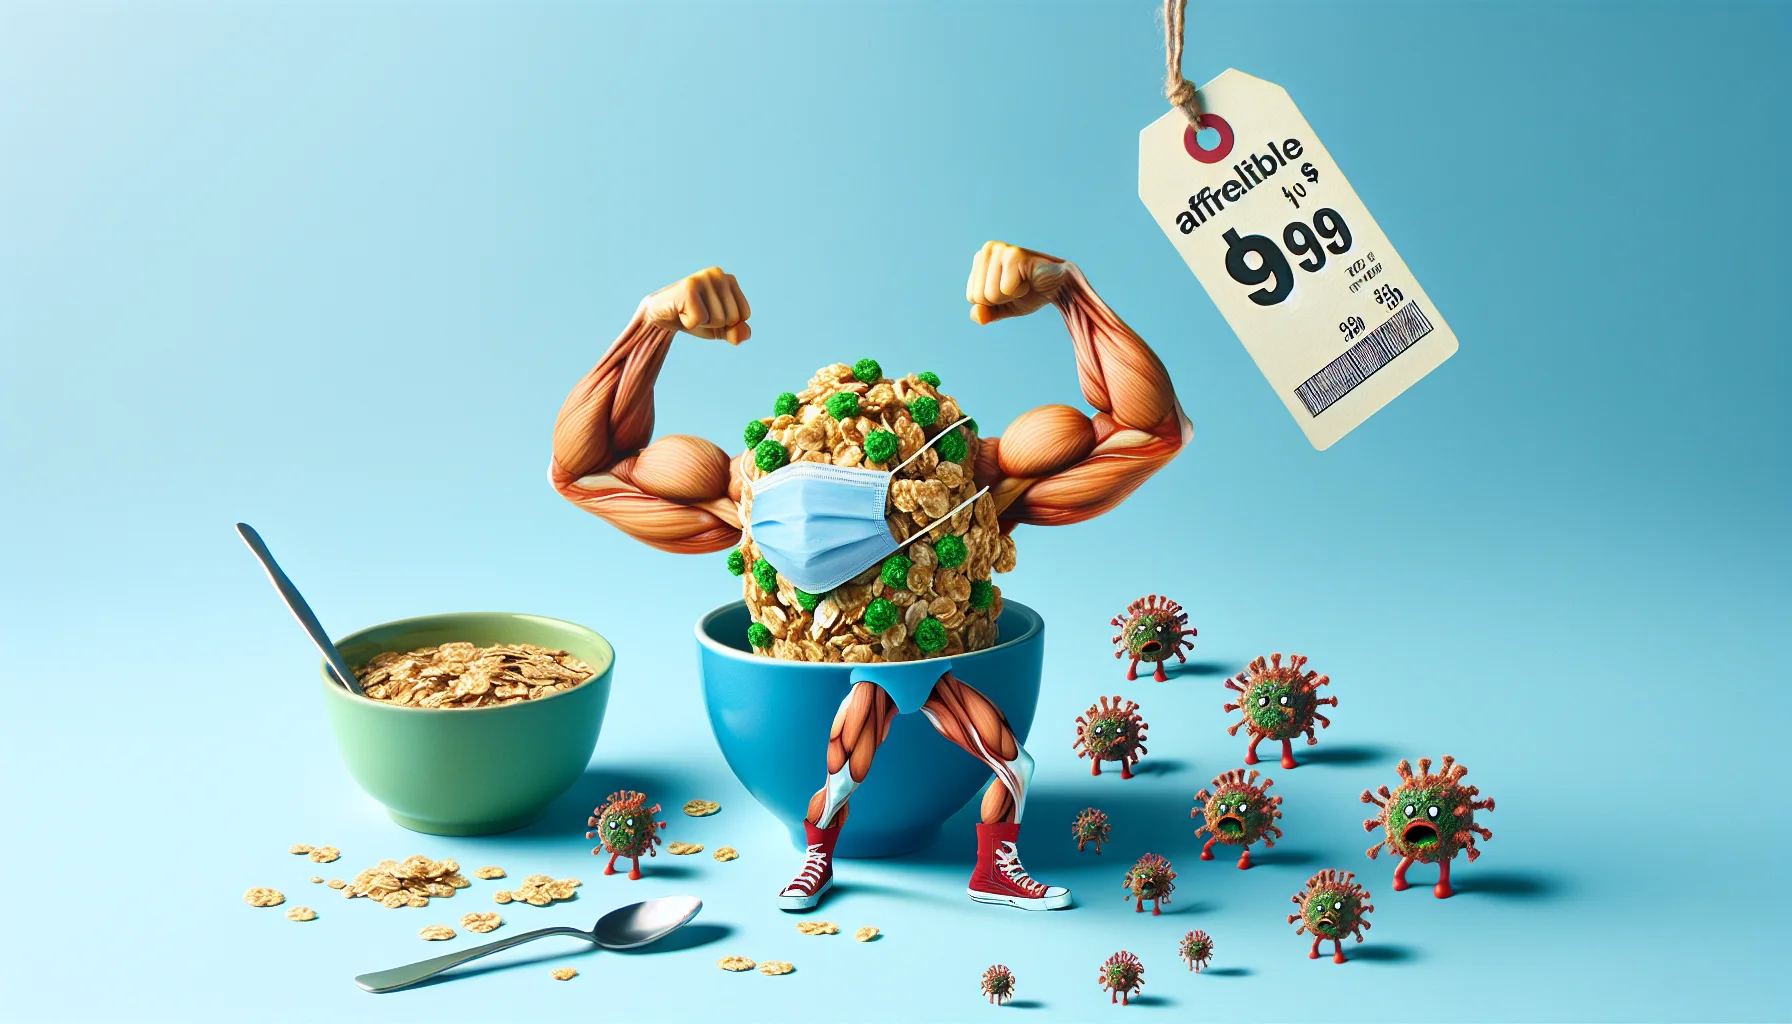 Create an image demonstrating a playful and humorous scene where a bowl of breakfast granola is flexing its muscles like a superhero. The granola is personified and artistically portrays strength to fight off the flu. Visible around the muscular granola superhero are tiny flu virus caricatures cowering in fear. A price tag hangs in the air showing an affordable amount, convincing people that eating healthy doesn't have to be expensive. This scene not only promotes a healthy lifestyle but also conveys it in a light-hearted, attractive manner.